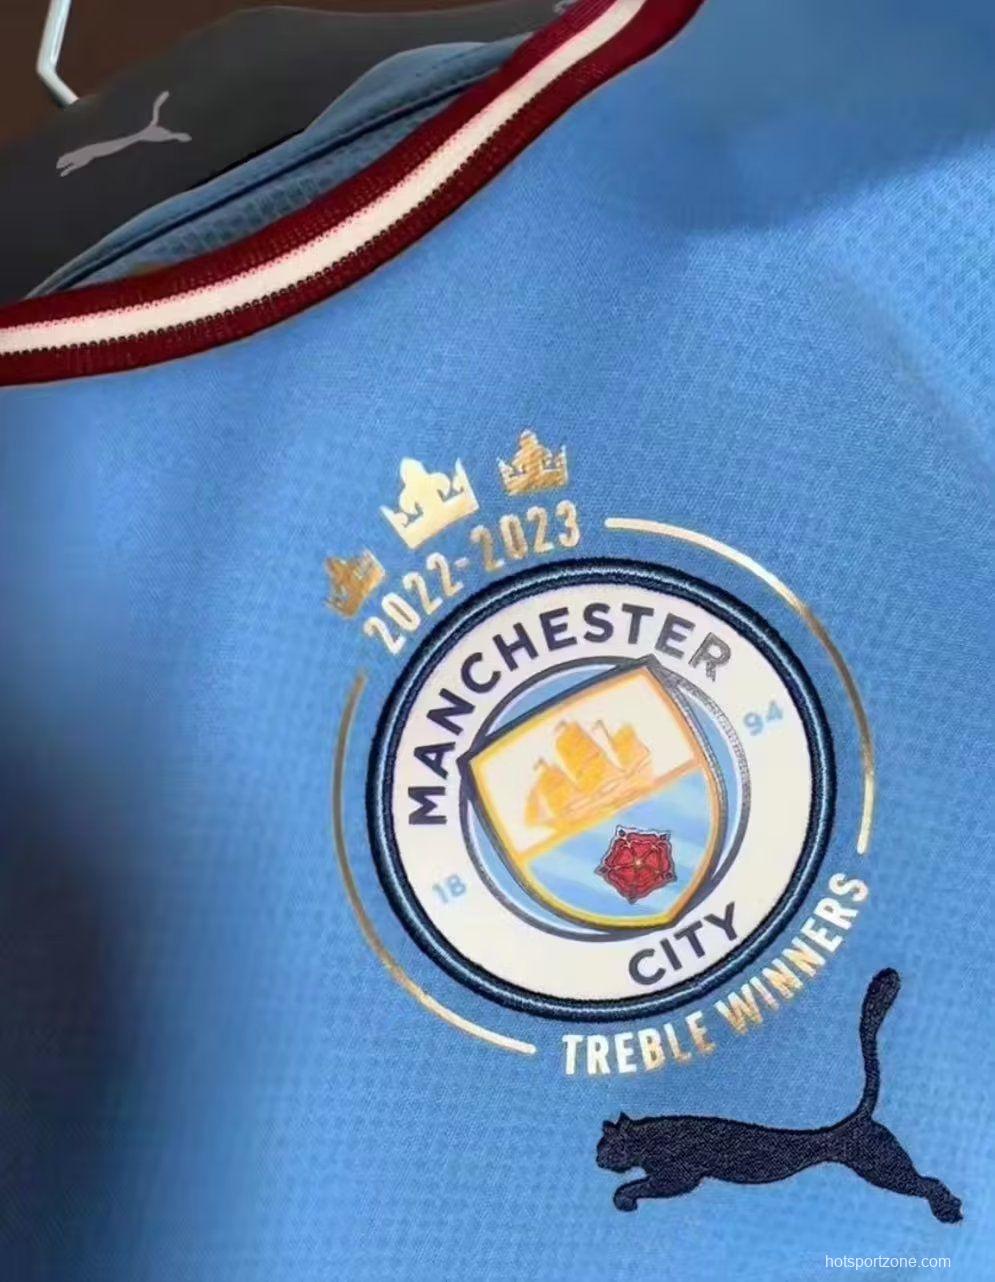 22/23 Manchester City Home Jersey With Treble Winners Patch